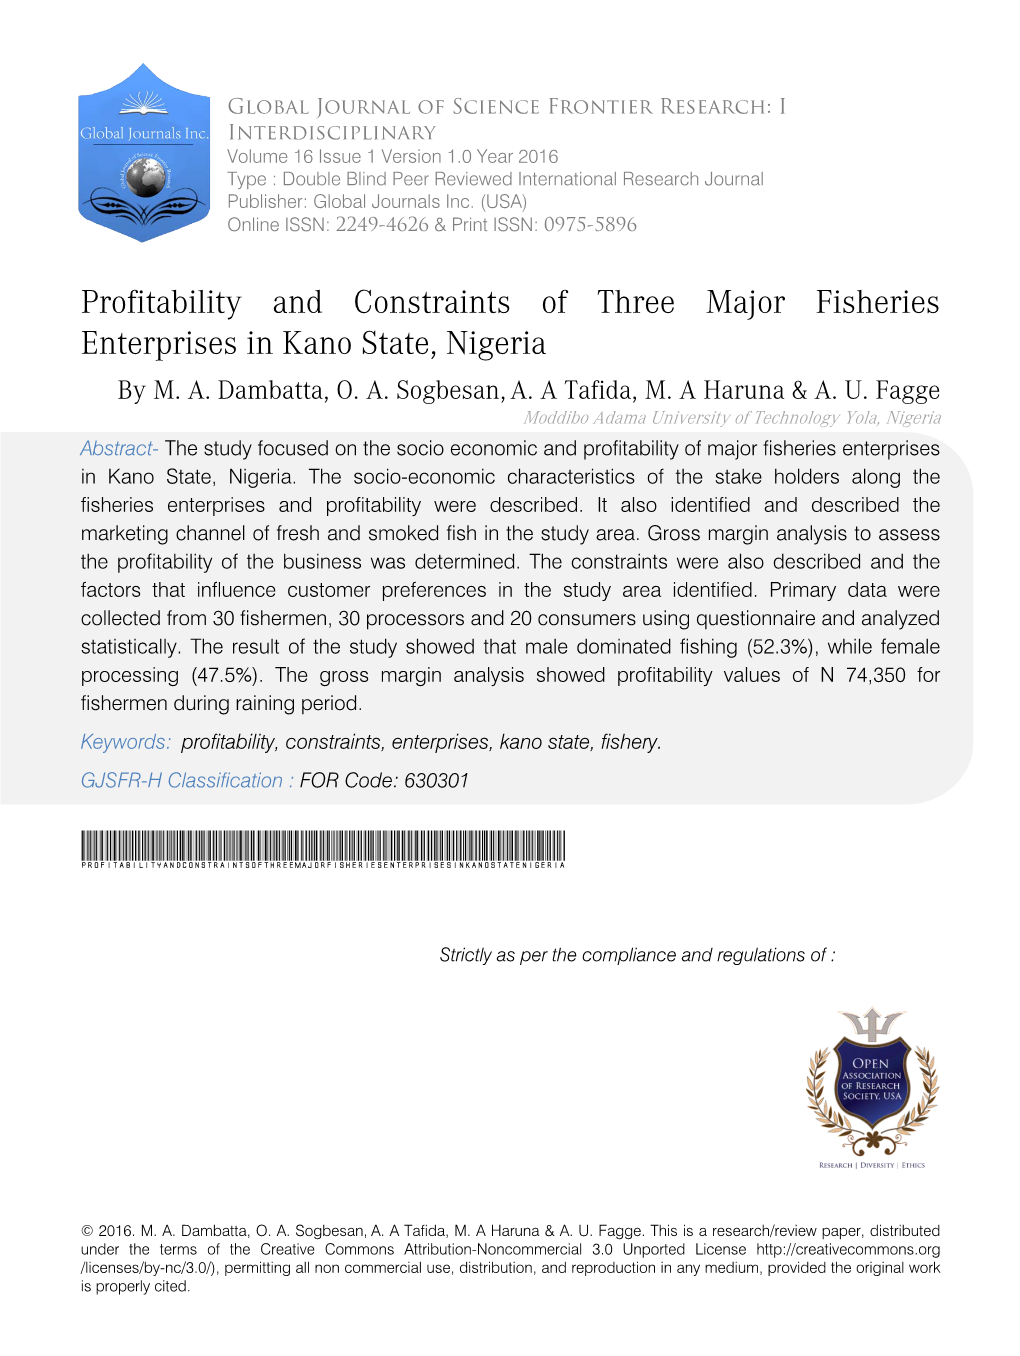 Profitability and Constraints of Three Major Fisheries Enterprises in Kano State, Nigeria by M